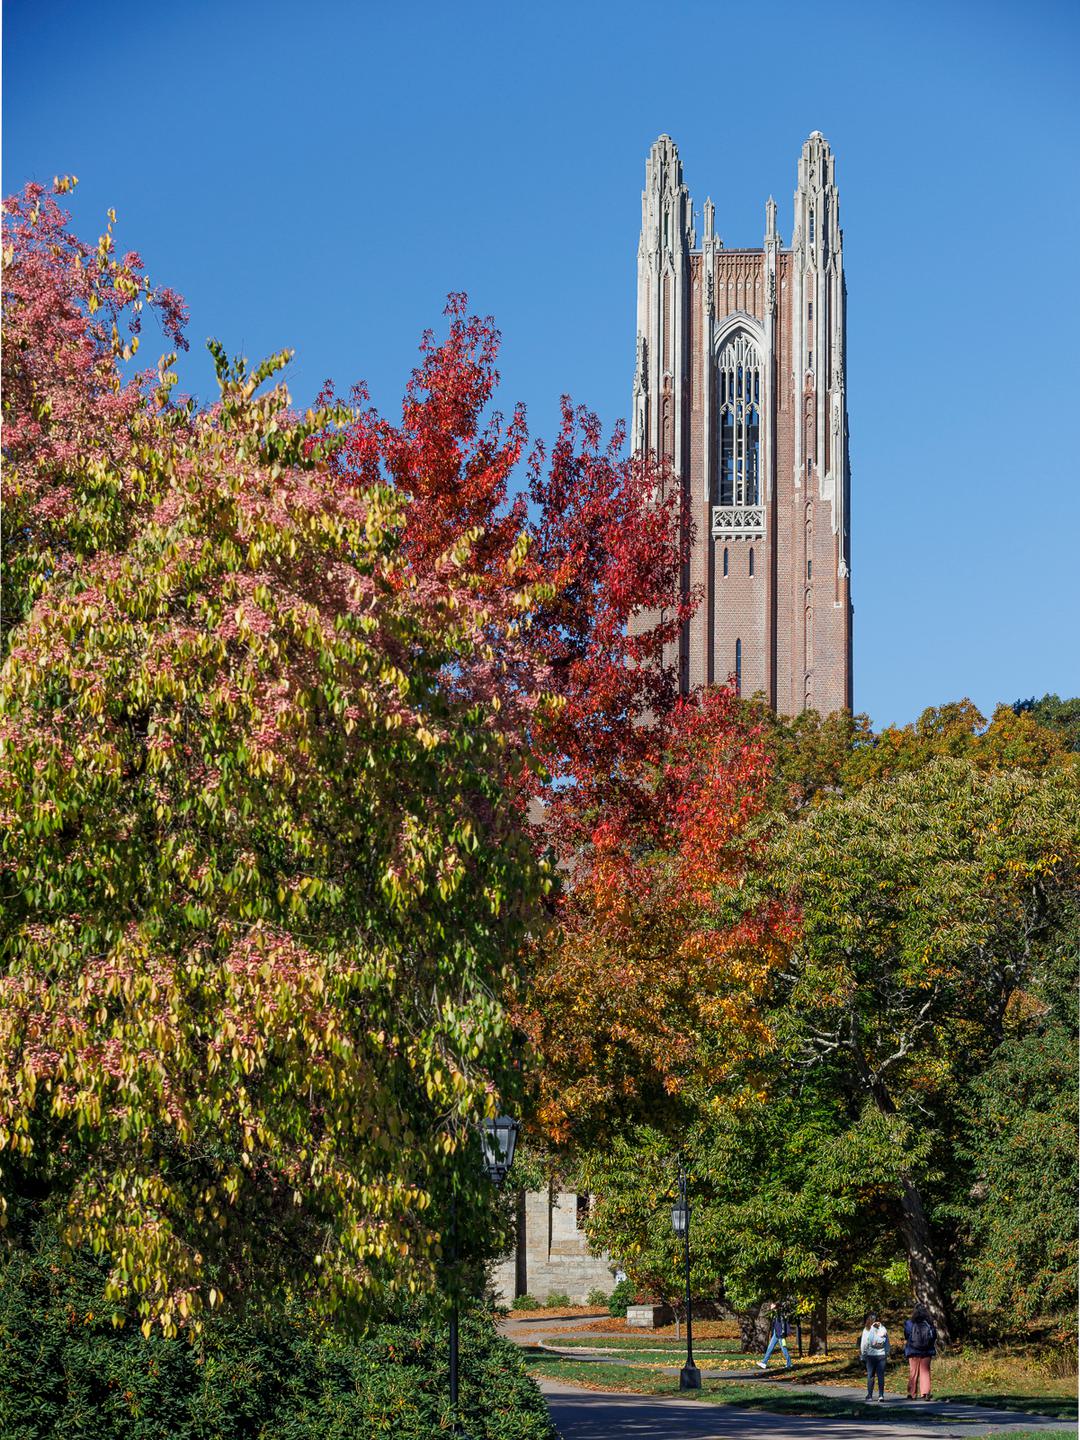 Galen Stone Tower with yellow and red autumn leaves on the trees.